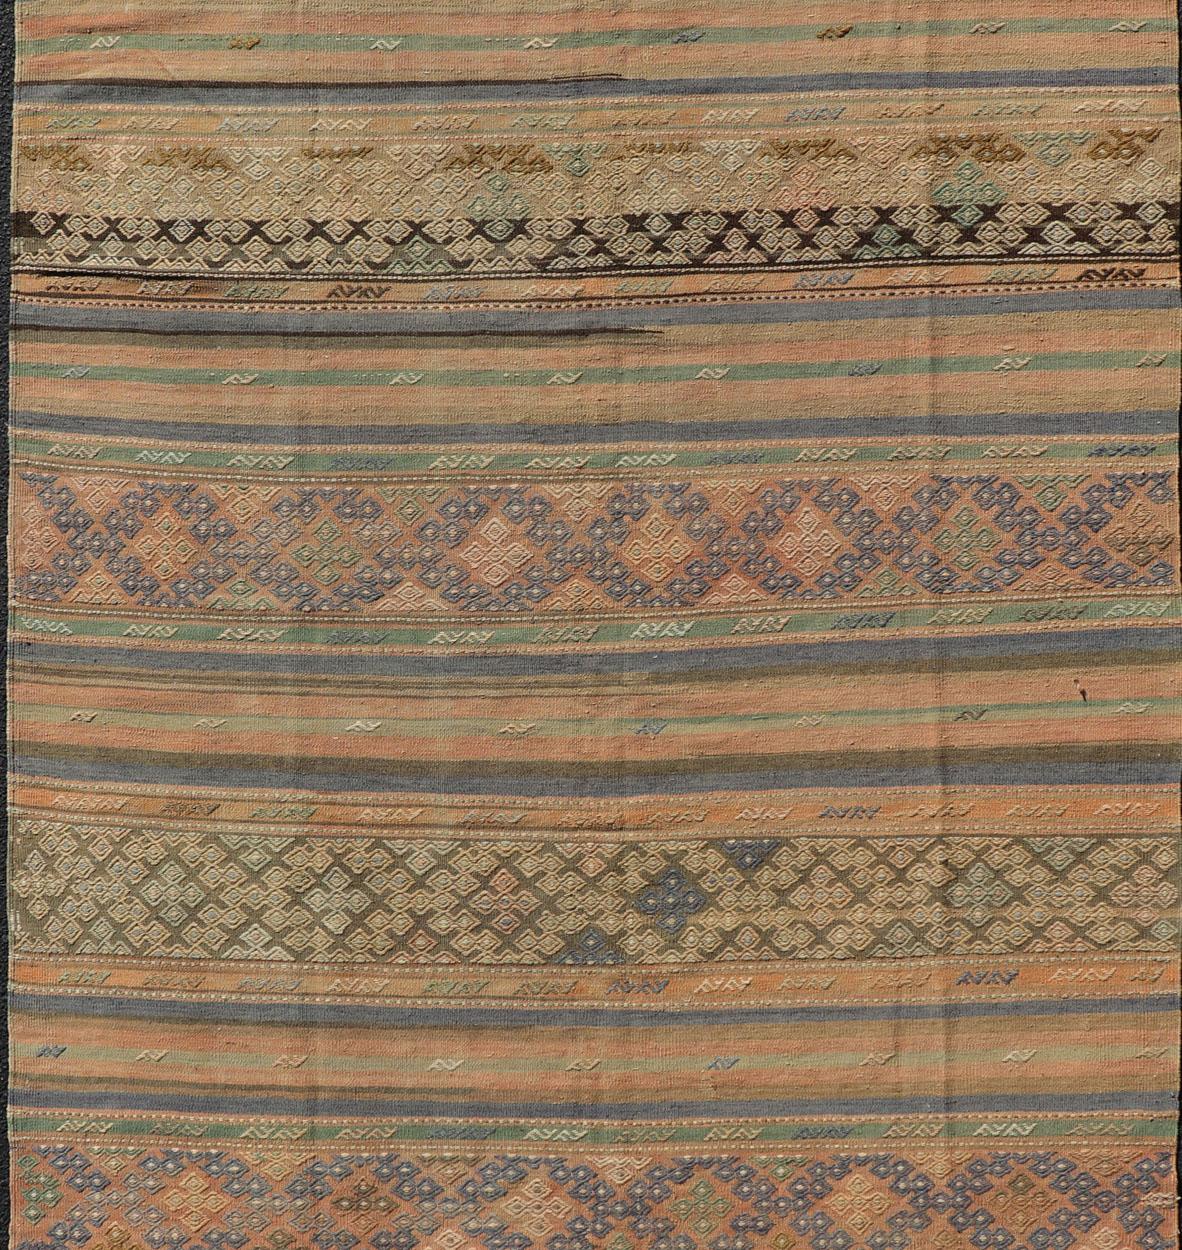 Hand-Woven Vintage Striped Turkish Kilim Rug with Geometric Shapes and Soft Muted Colors For Sale